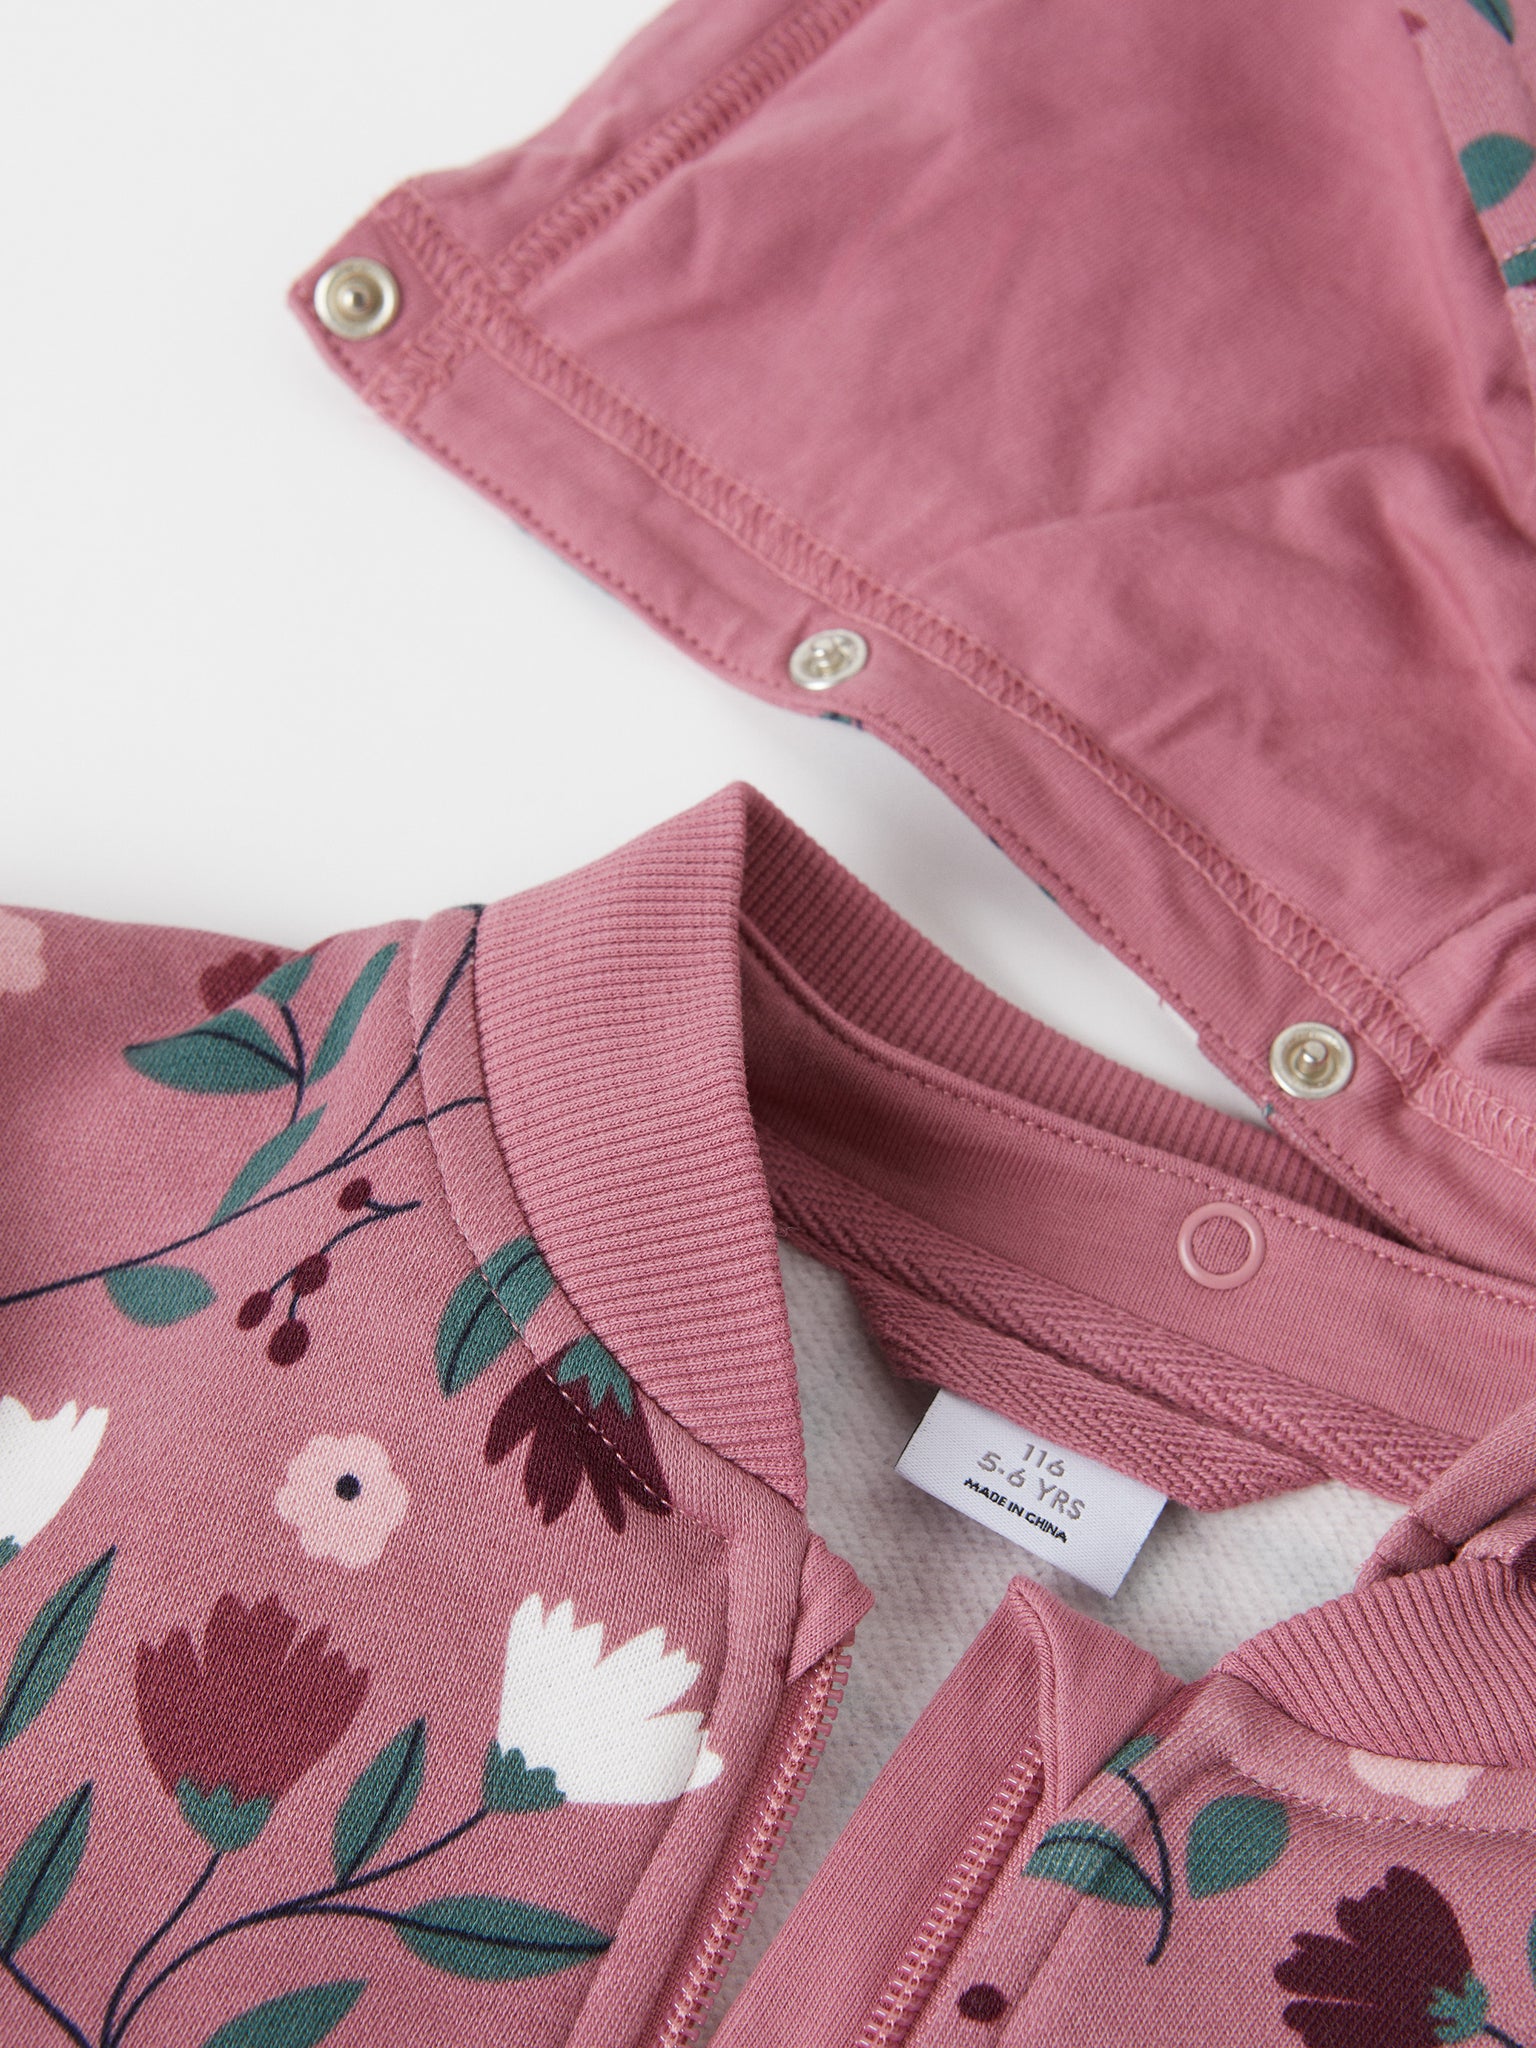 Organic Cotton Floral Kids Hoodie from the Polarn O. Pyret kidswear collection. Clothes made using sustainably sourced materials.